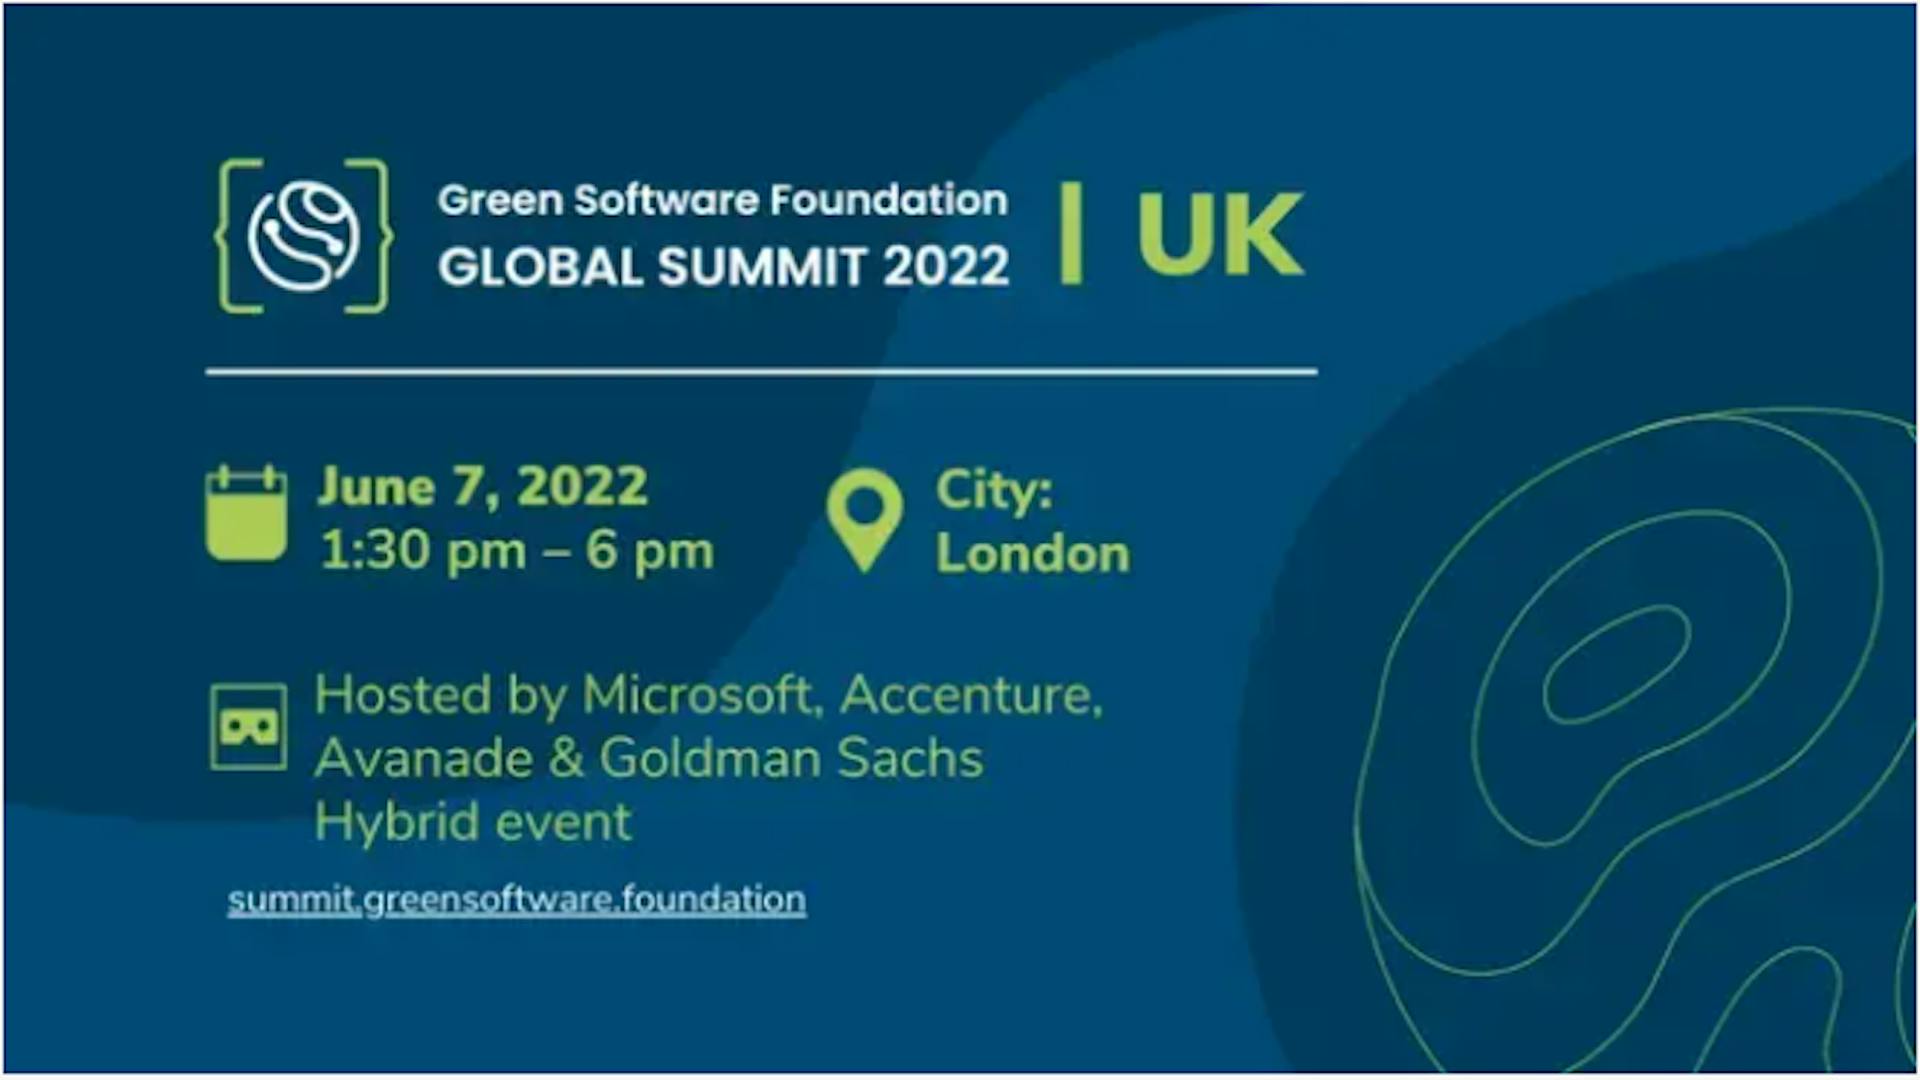 GSF Global Summit London hosted by Microsoft, Accenture, Avanade & Goldman Sachs